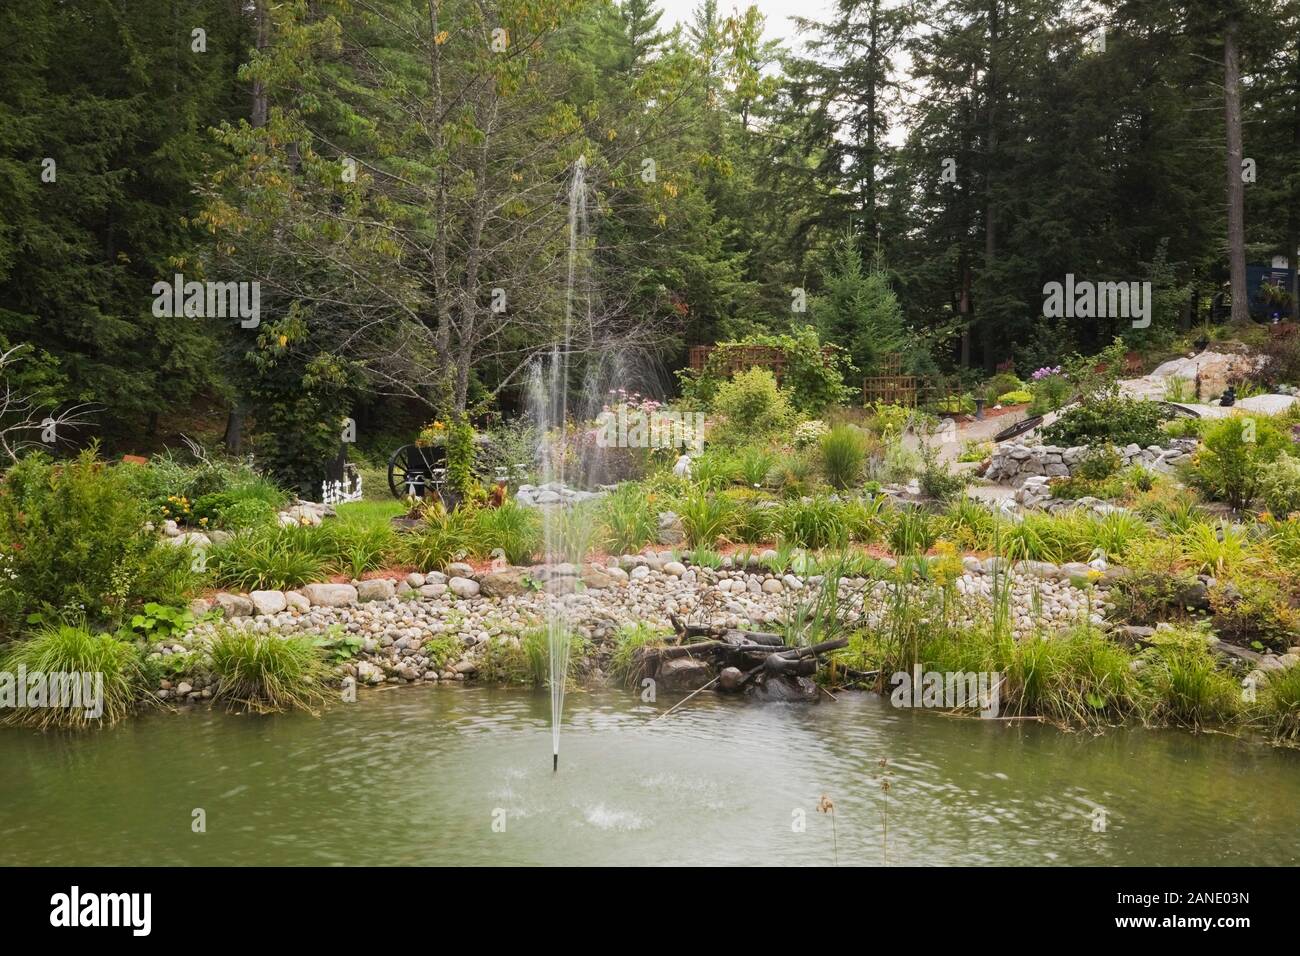 Pond with water fountain jet spray and paths and borders planted with perennial plants, flowers, shrubs including Hemerocallis - Daylilies, Echinacea. Stock Photo